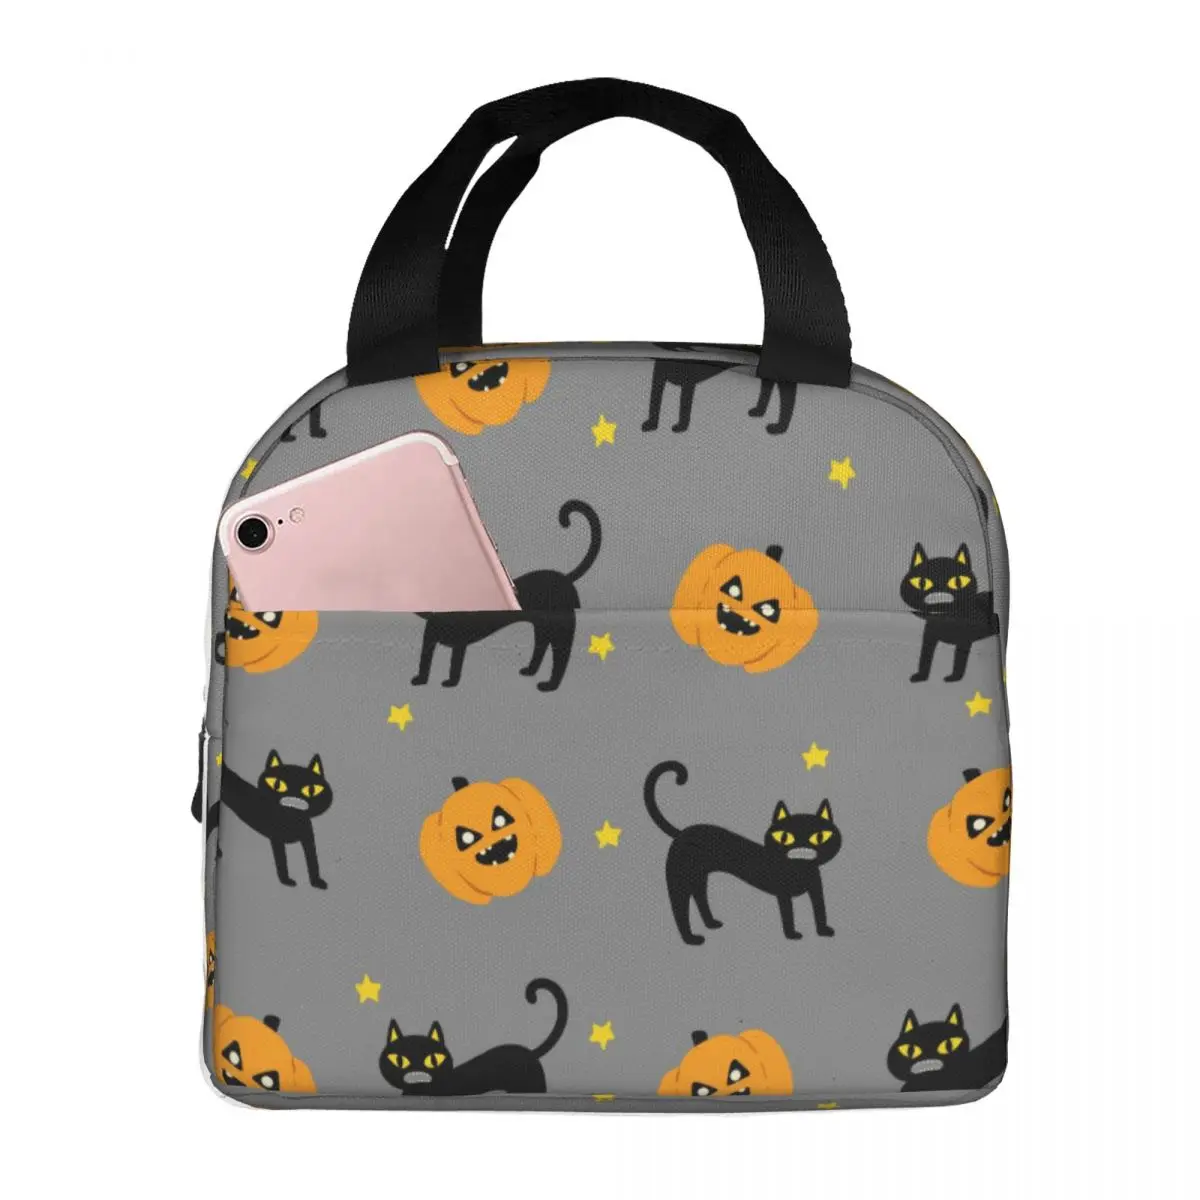 Lunch Bag for Women Kids Halloween Thermal Cooler Portable Picnic Work Canvas Tote Bento Pouch